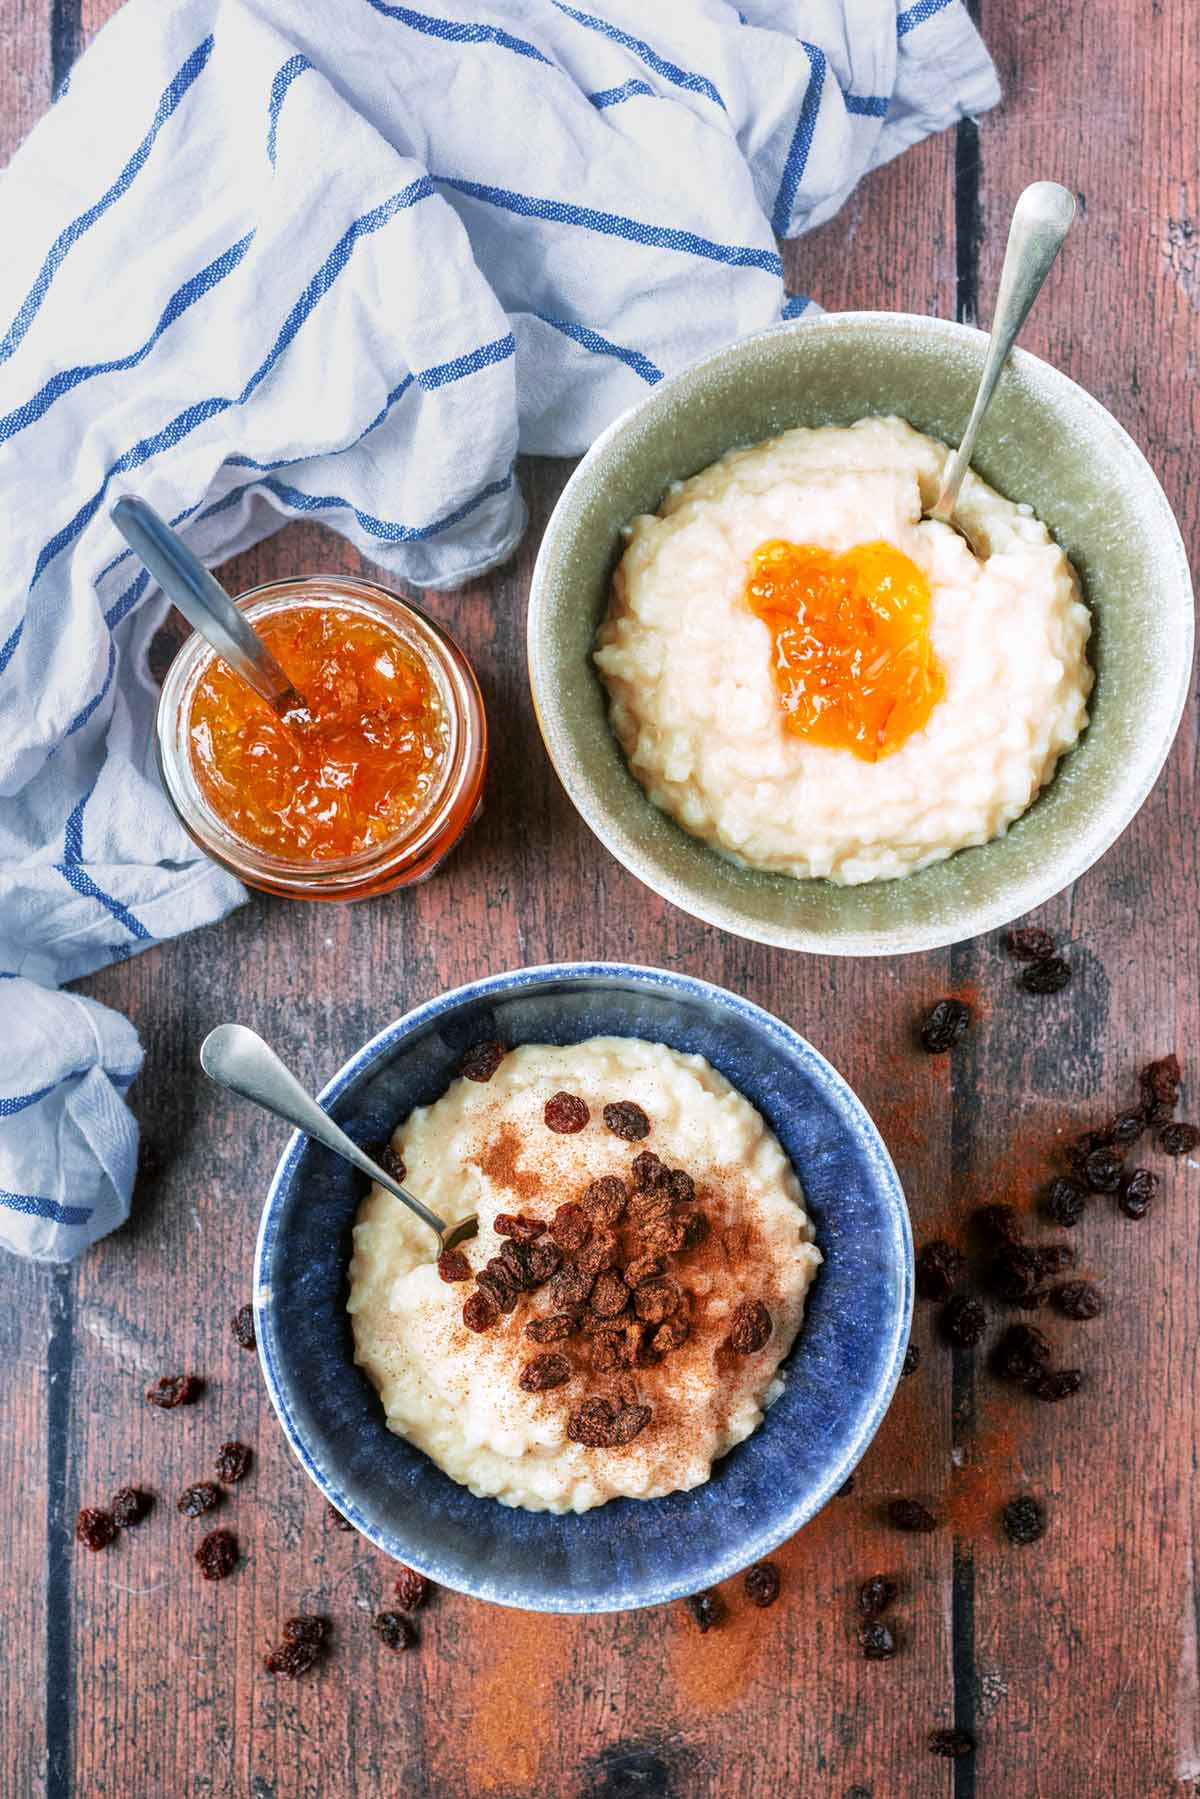 Two bowls of rice pudding, one topped with marmalade, one topped with raisins.